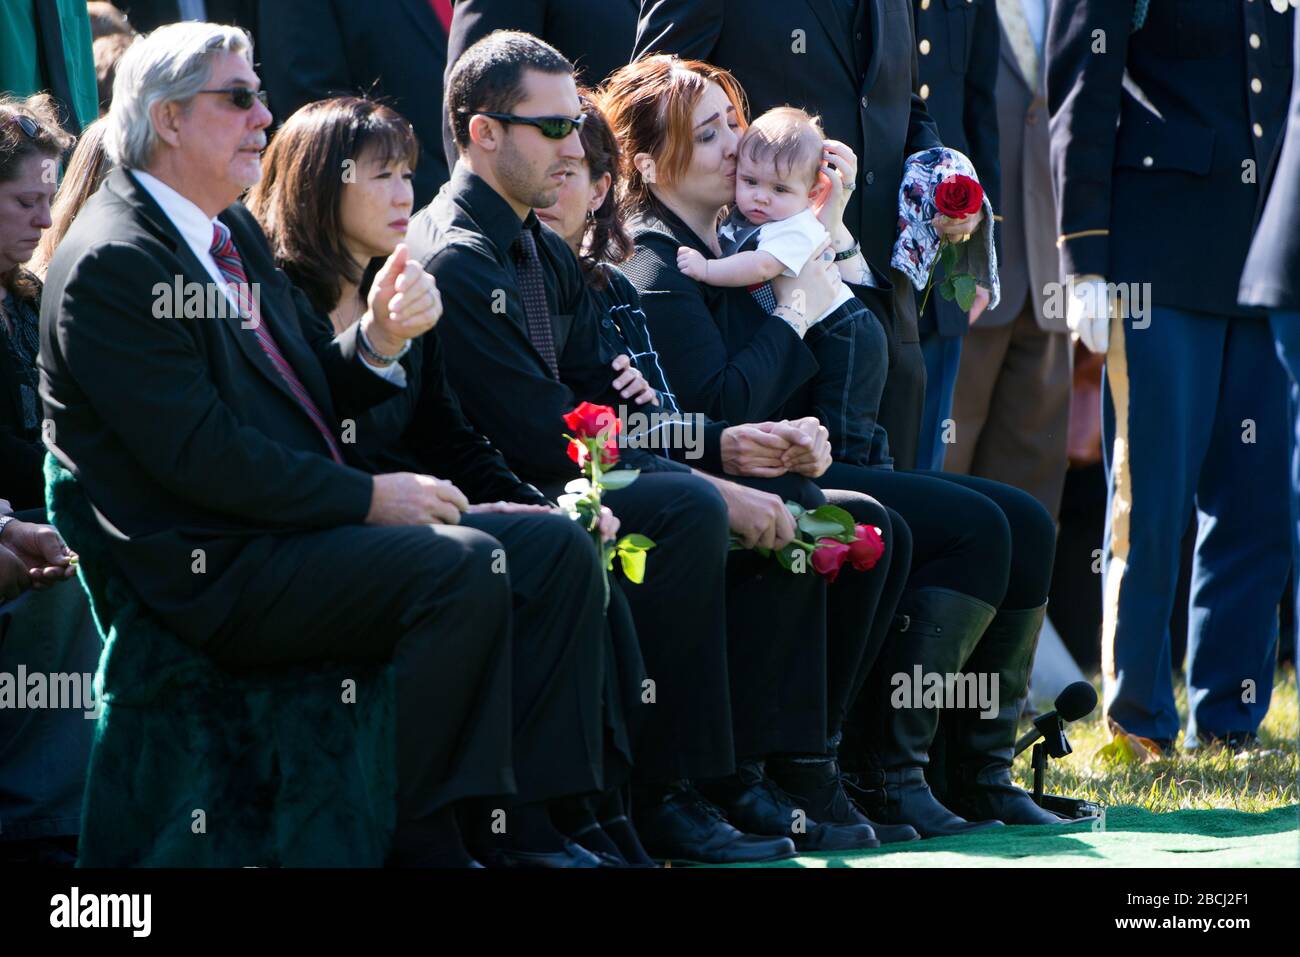 'Alexandra D. McClintock, second from right, kisses her son Declan during the graveside service of her husband, U.S. Army Sgt. First Class Matthew Q. McClintock, in Section 60 of Arlington National Cemetery, March 7, 2016, in Arlington, Va. McClintock was killed in action Jan. 5, 2016, in Afghanistan. (U.S. Army photo by Rachel Larue/Arlington National Cemetery/released); 7 March 2016, 14:47; Graveside service for U.S. Army Sgt First Class Matthew Q. McClintock takes place in Section 60 of Arlington National Cemetery; Arlington National Cemetery; ' Stock Photo